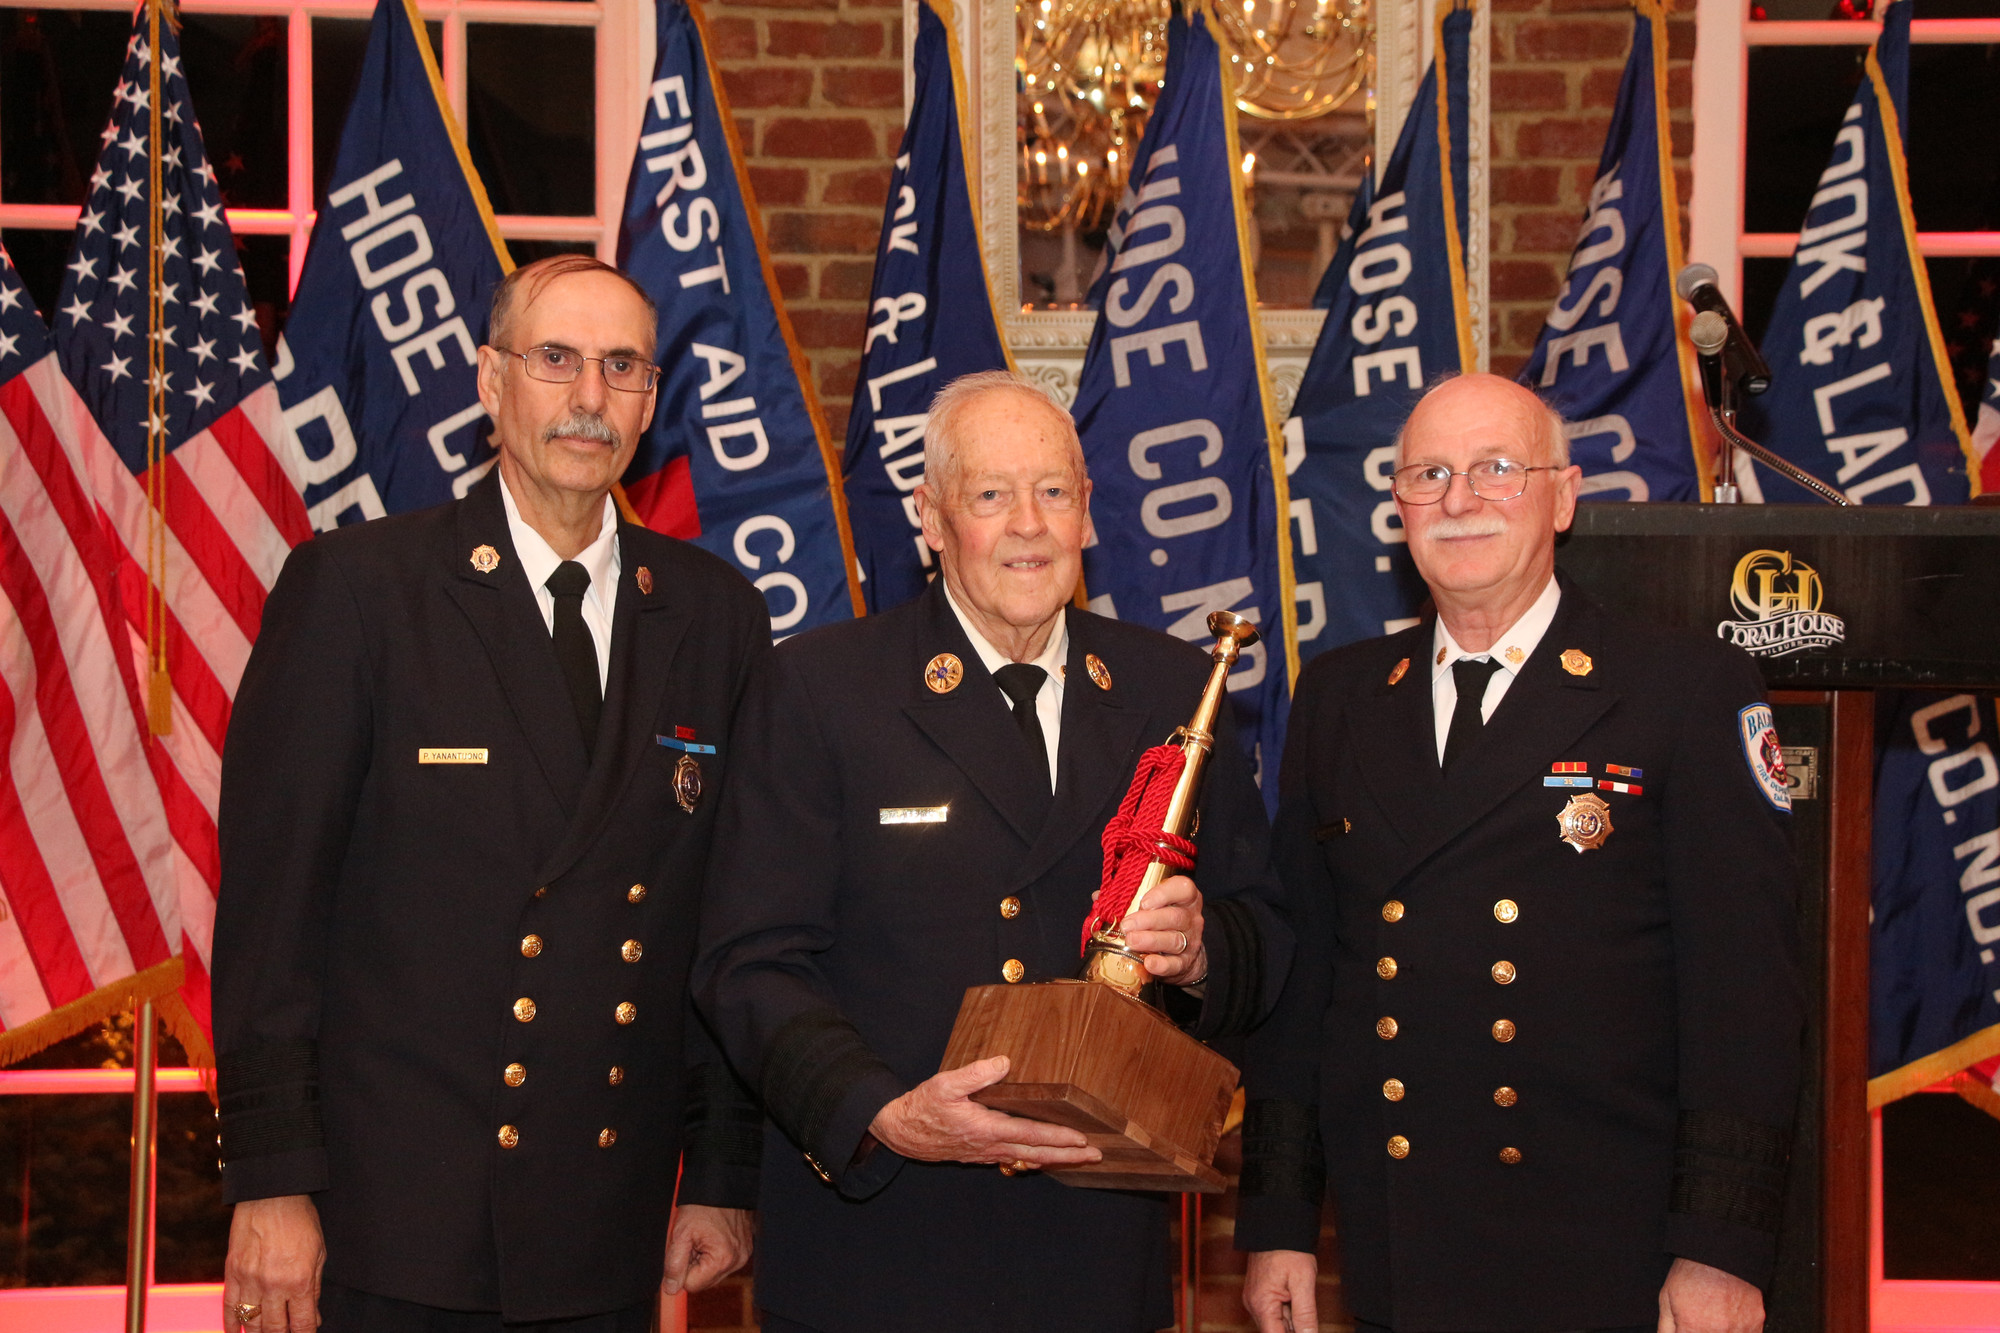 Ex-cheif norm Abrams, center, was honored for his 60 years of service to the department. With him are commissioners Paul A. Yanantuono, left, and Robert Quackerbush.